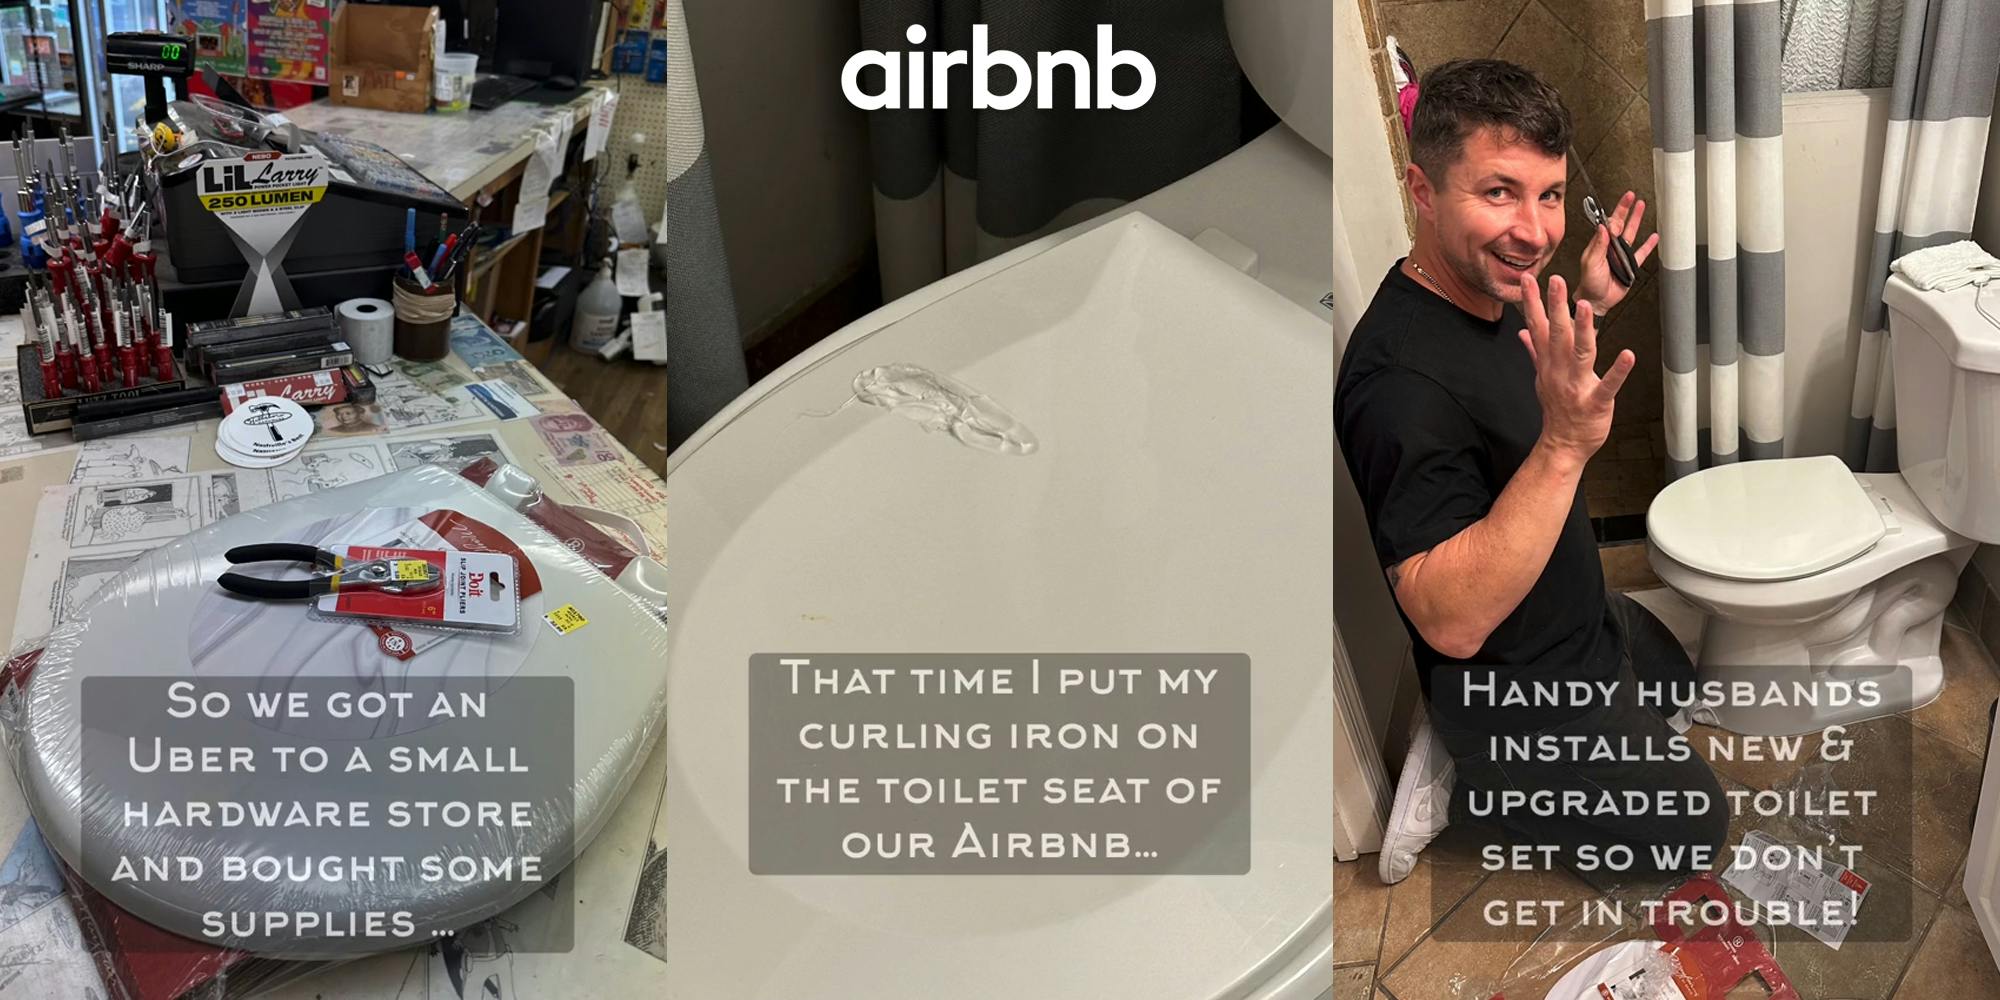 hardware store counter with toilet seat with caption "So we got an Uber to a small hardware store and bought some supplies" (l) toilet with damage with caption "That time I put my curling iron on the toilet seat of our Airbnb" with Airbnb logo at top (c) man replacing toilet seat with caption "Handy husbands installs new & upgraded toilet set so we don't get in trouble!" (r)